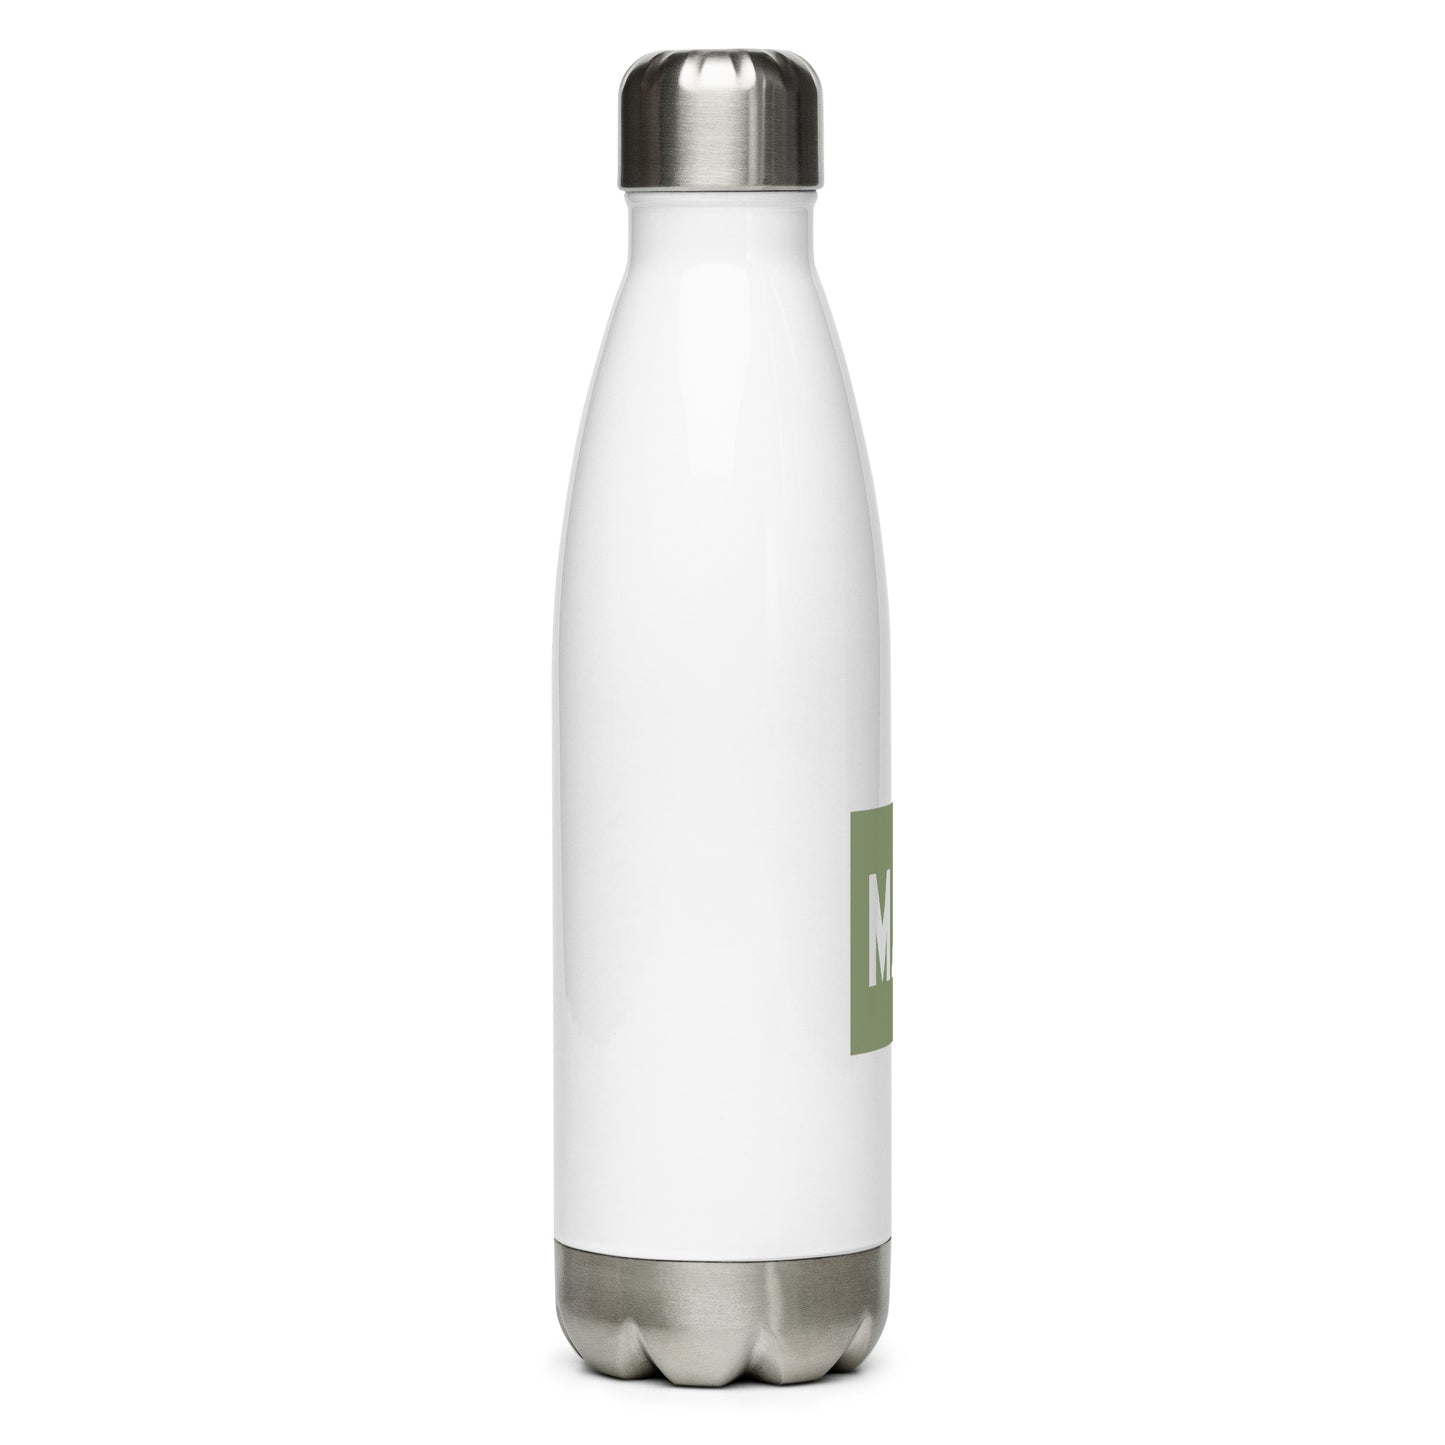 Aviation Gift Water Bottle - Camo Green • MAD Madrid • YHM Designs - Image 07